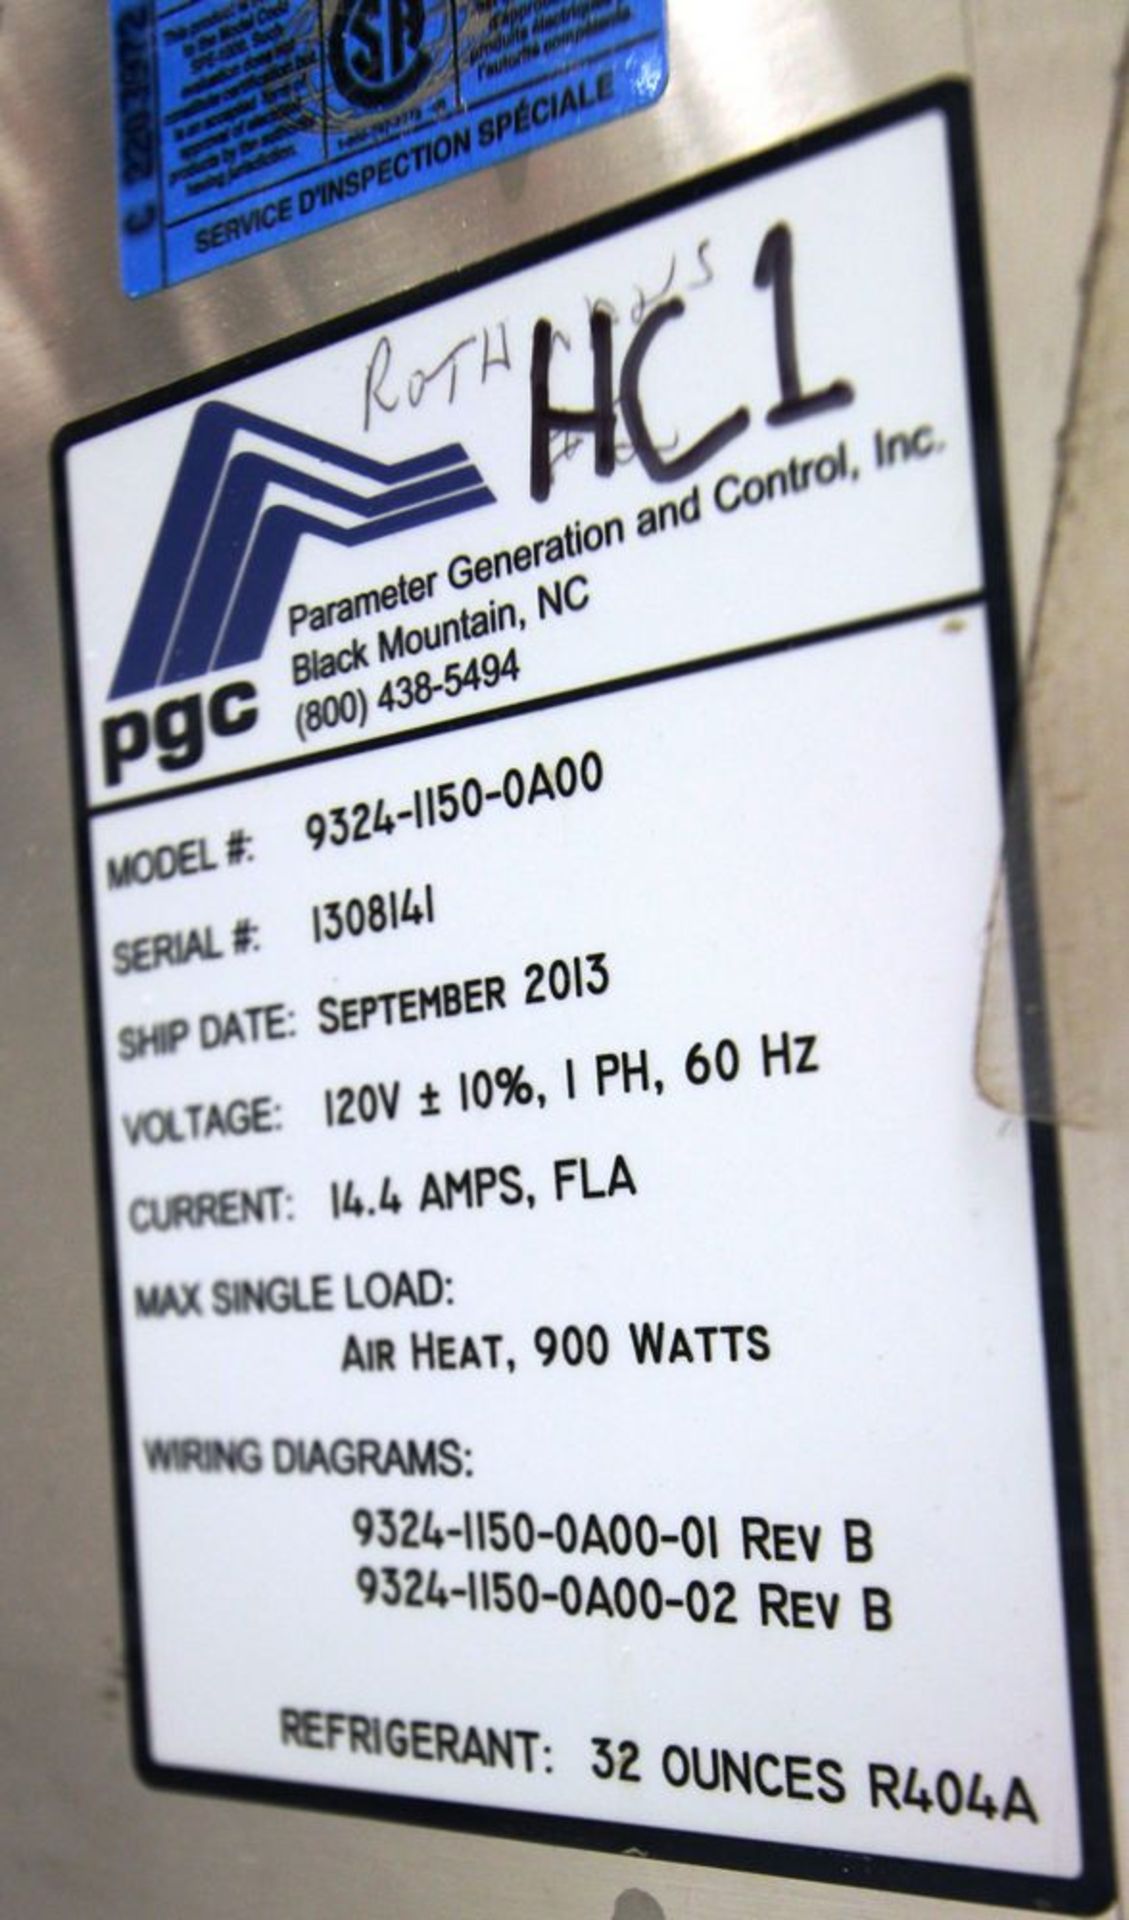 2013 PGC 9324-1150-0A00 HUMIDITY CONTROL UNIT, S/N 1308141 - Image 2 of 2